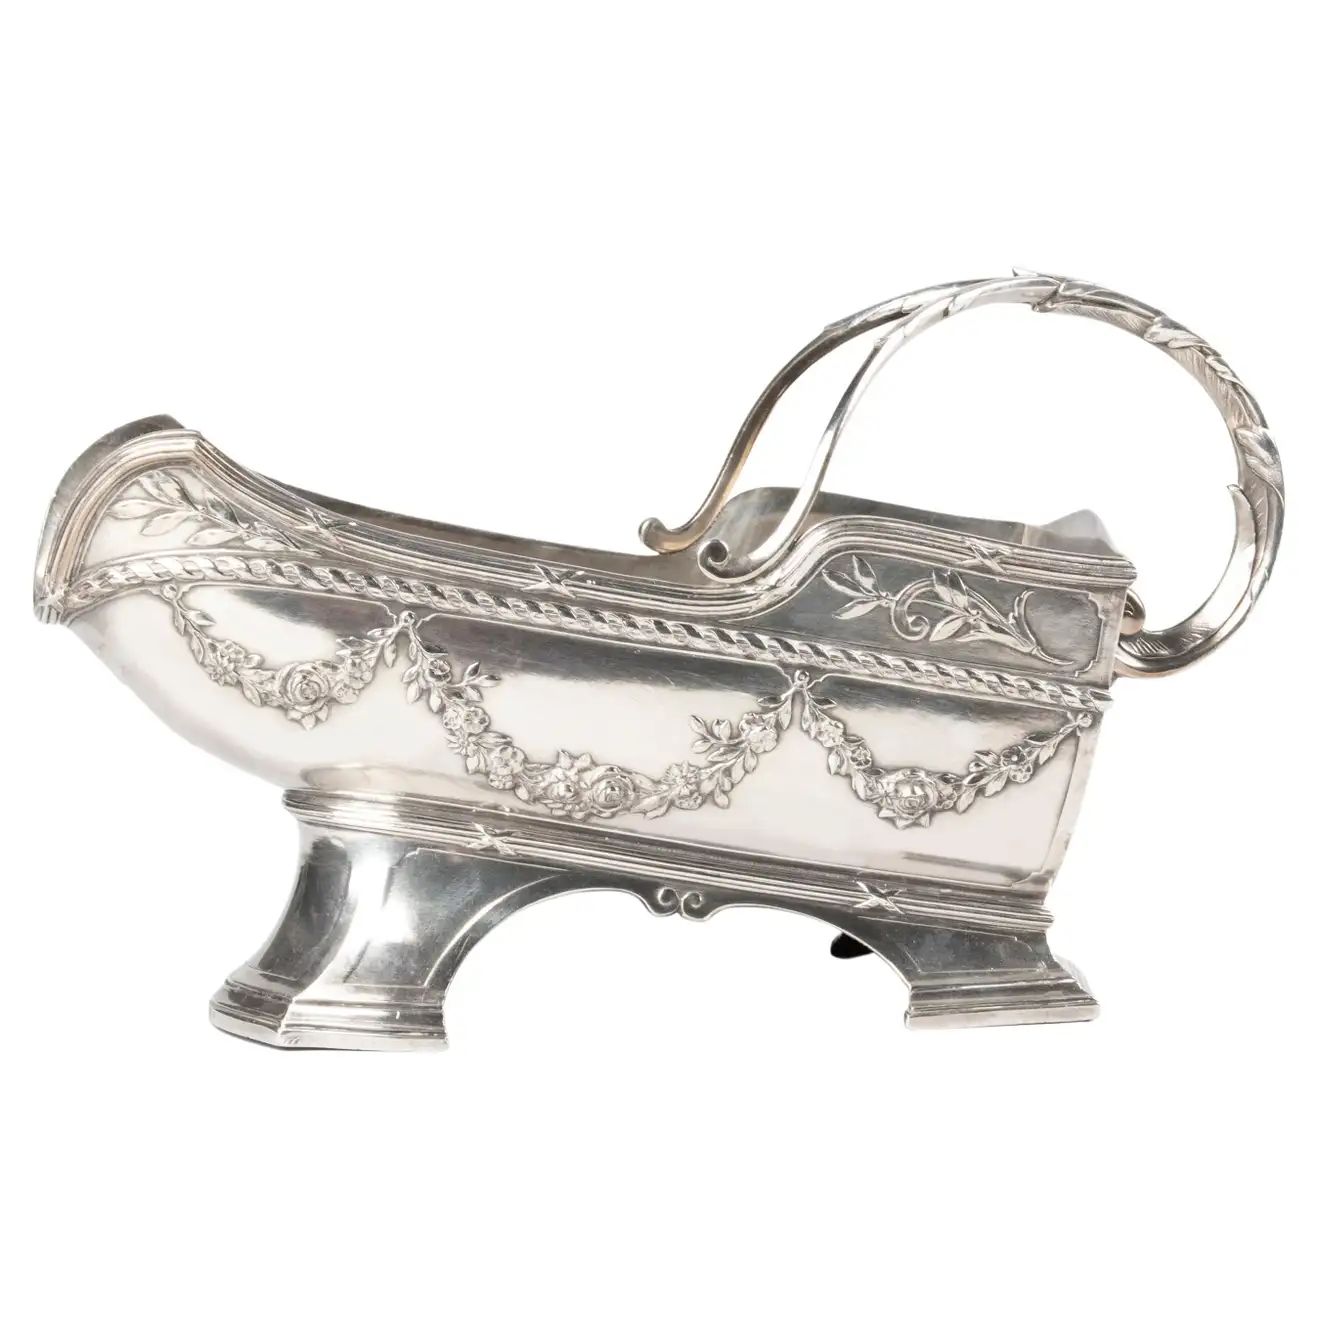 Silver Plated Wine-Bottle Holder Made by Minerva Louis XVI-Style | 1stDibs